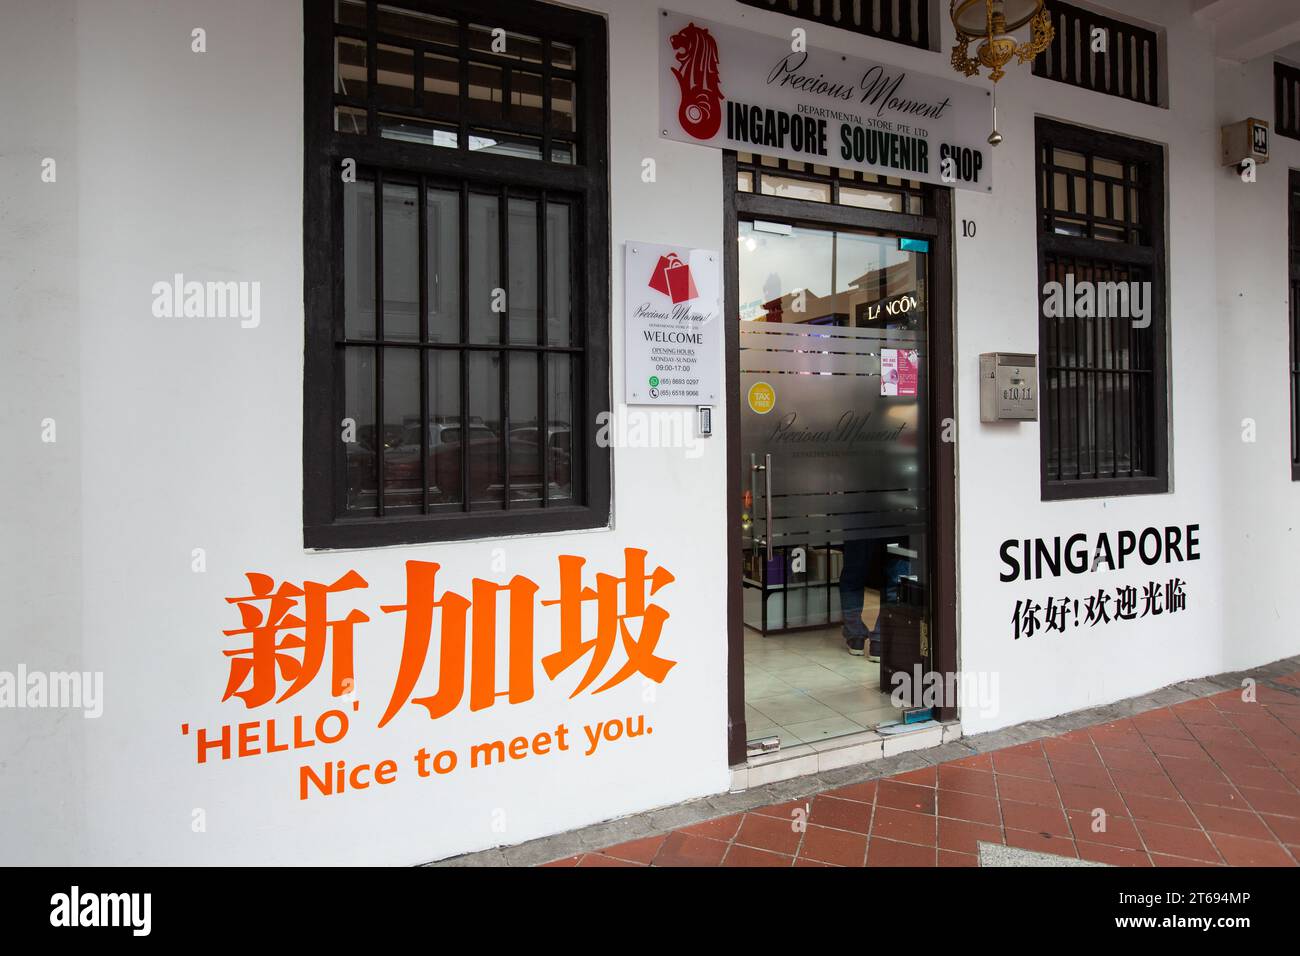 A business that sells Singapore gifts to tourists, Singapore. Stock Photo